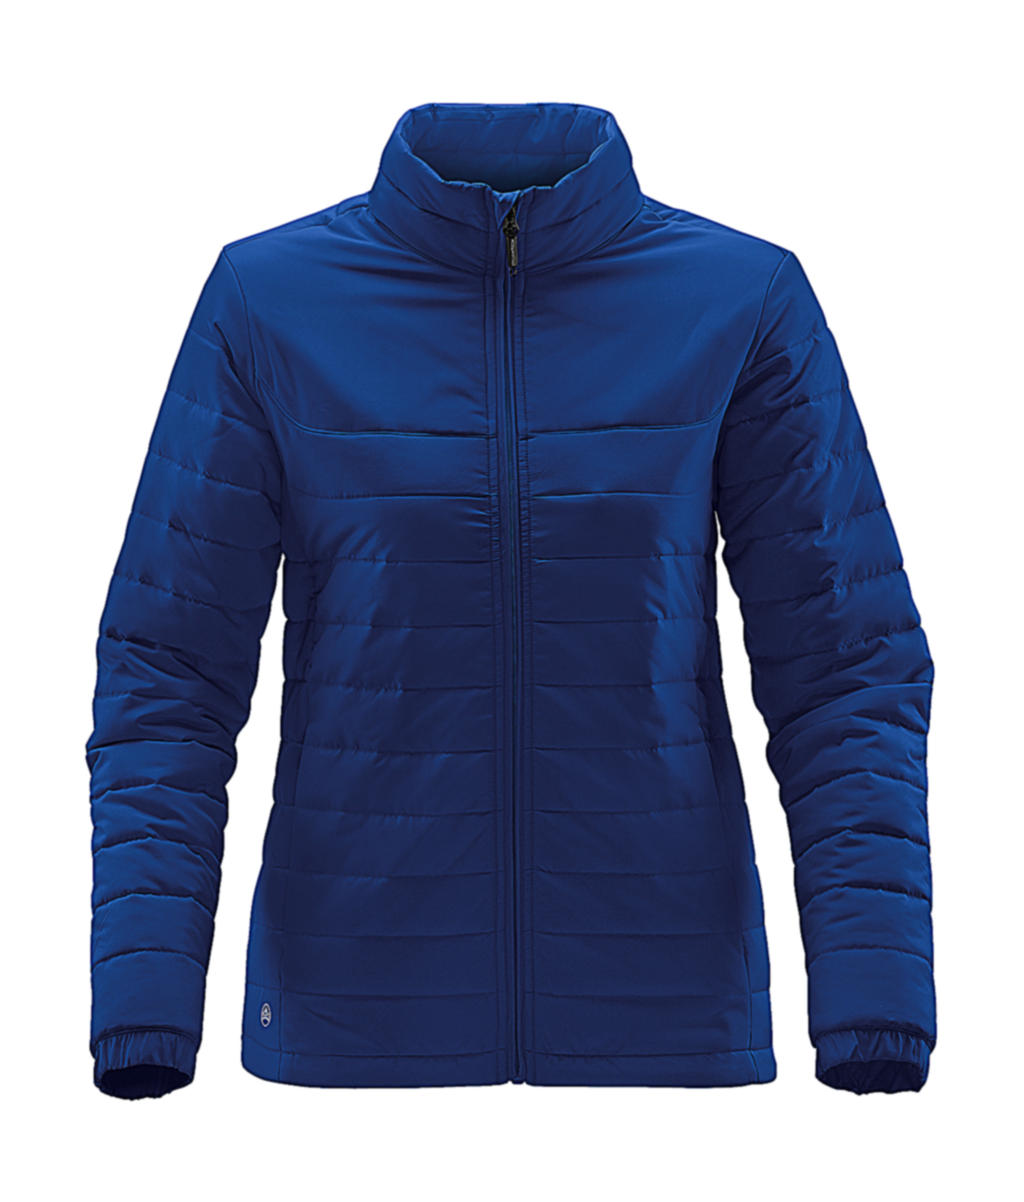  Womens Nautilus Thermal Jacket in Farbe Azure